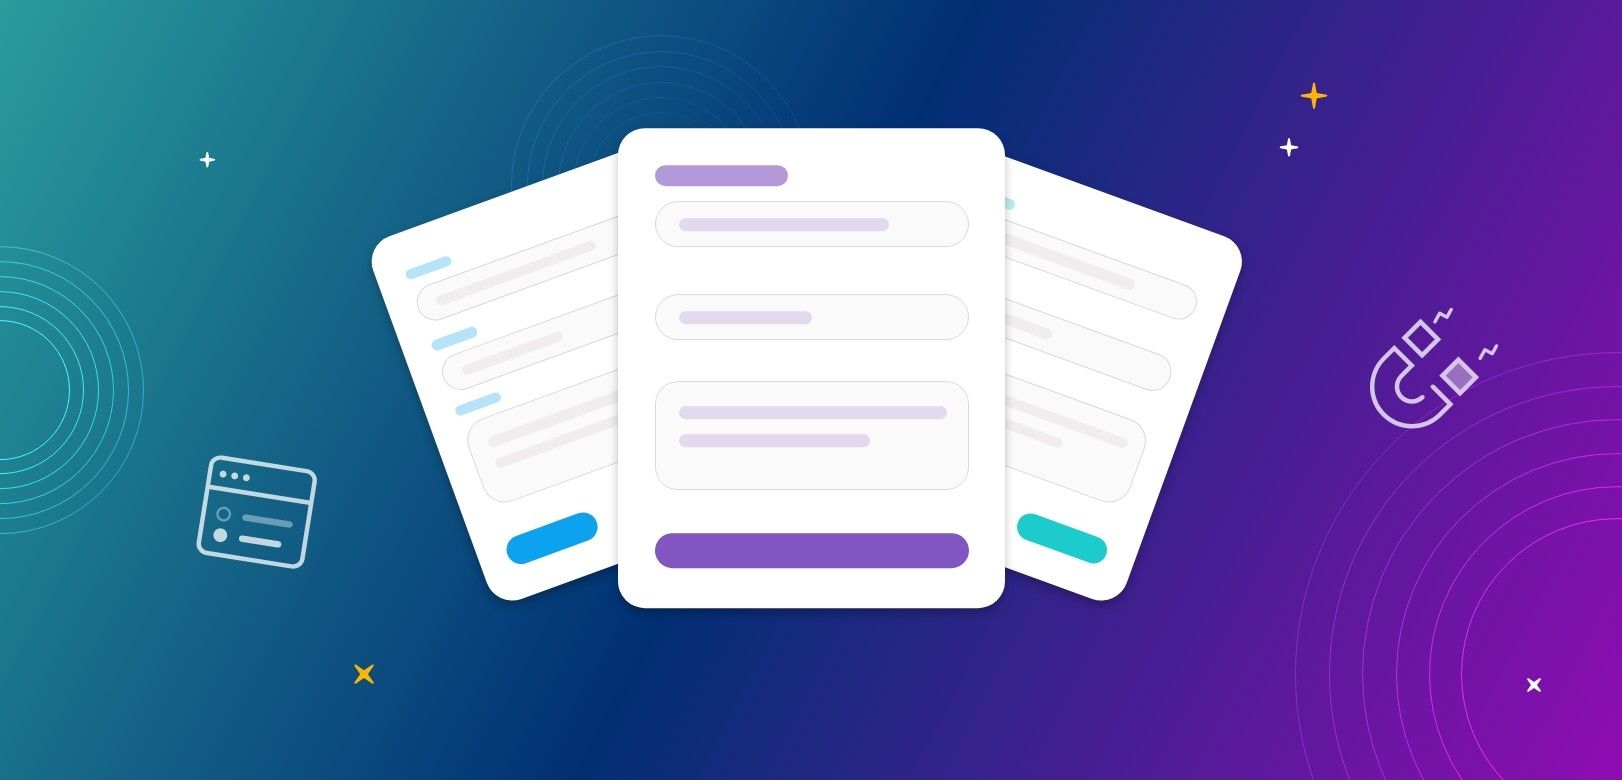 Lead generation & Web forms - A complete guide